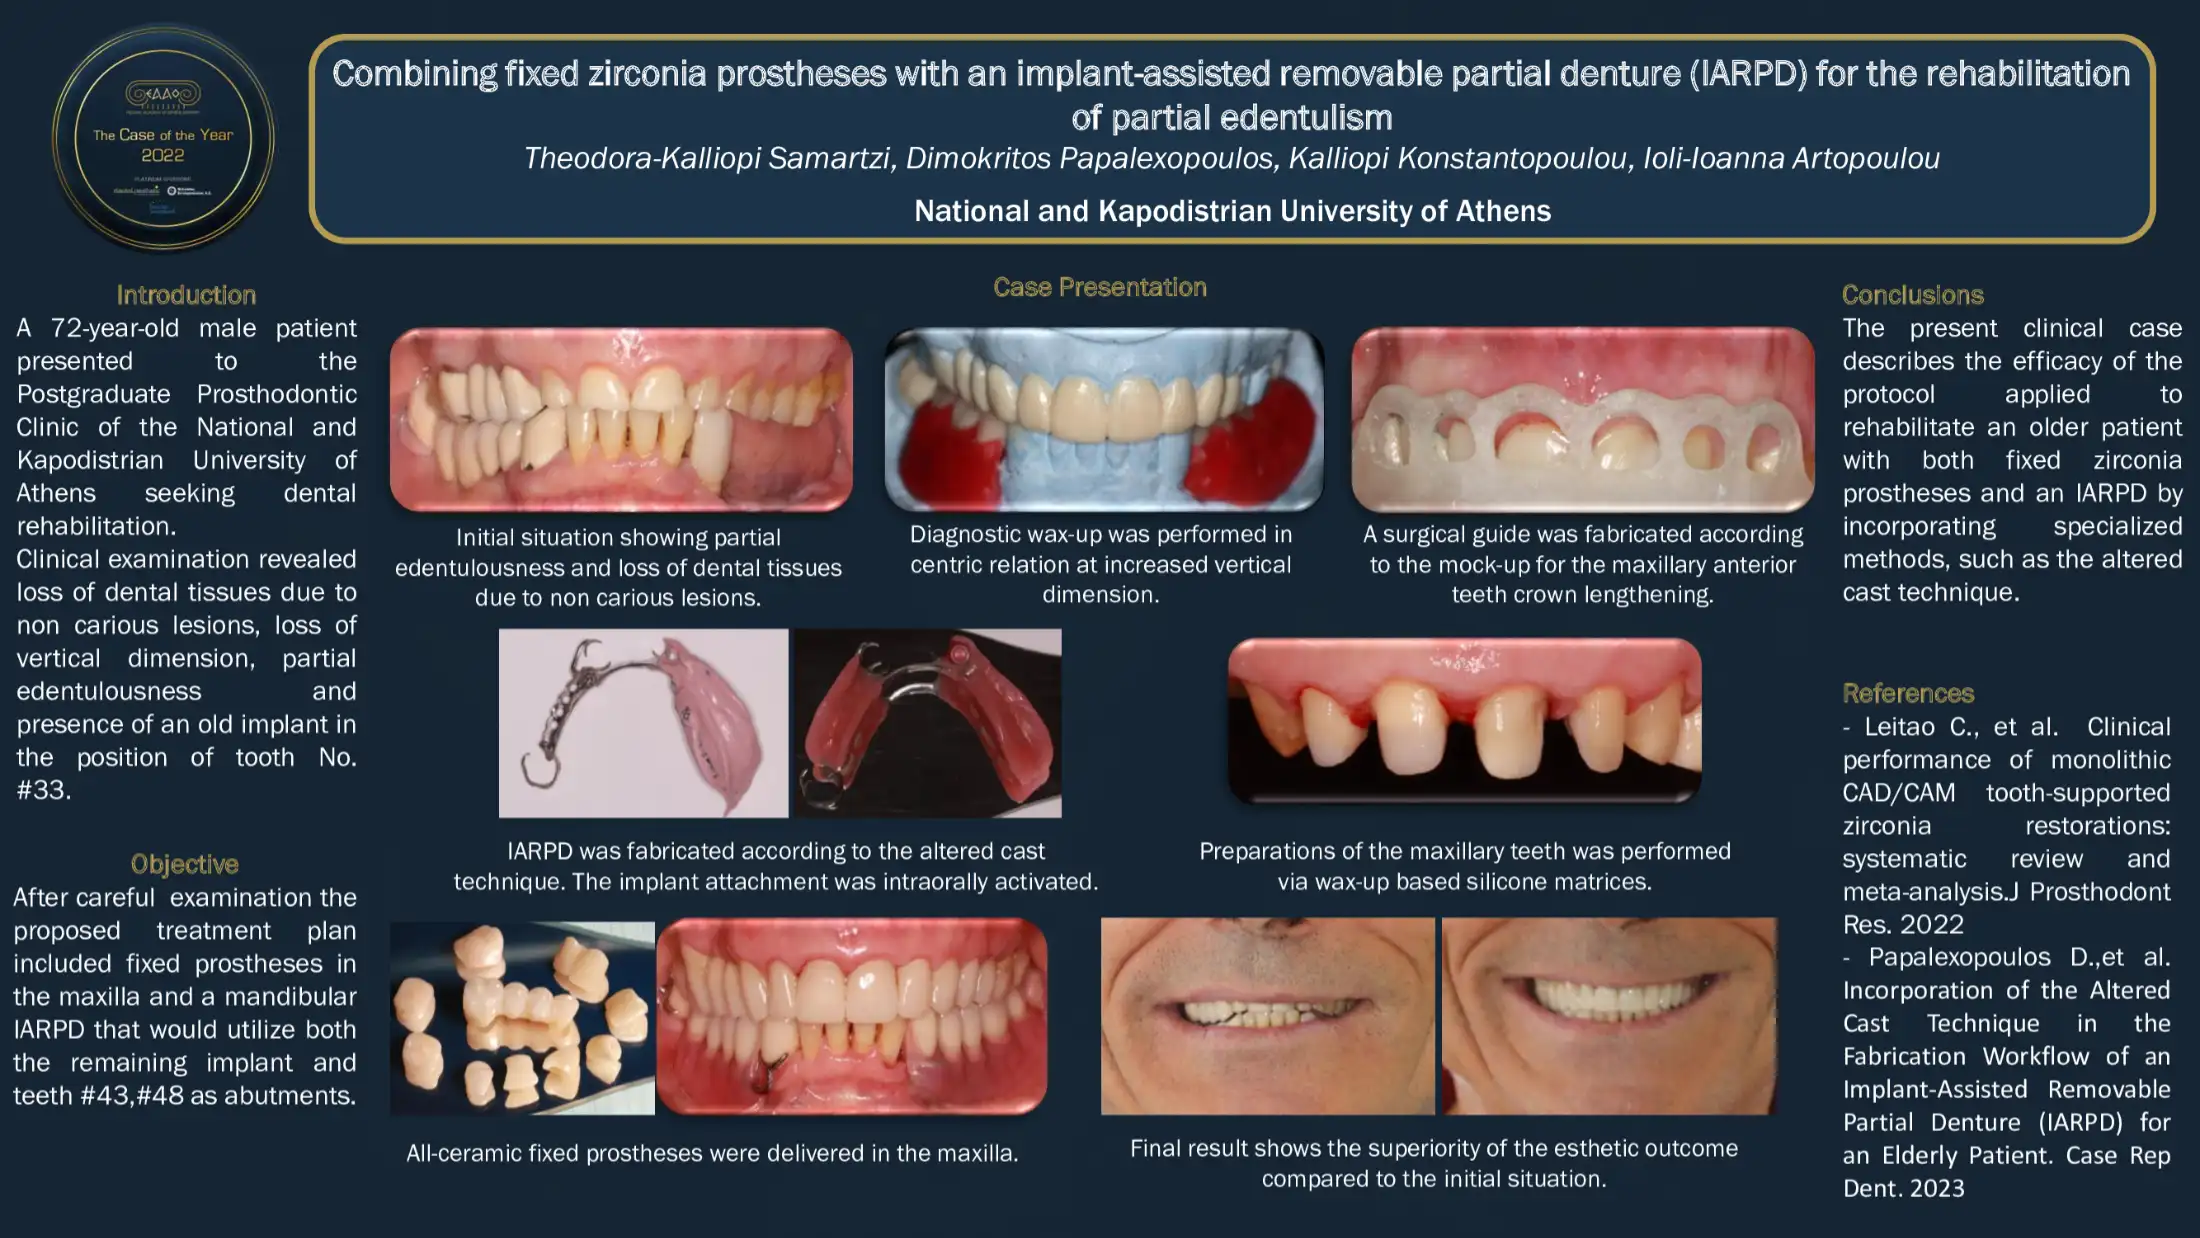 Combining fixed zirconia prostheses with an implant-assisted removable partial denture (IARPD) for the rehabilitation of partial edentulism.